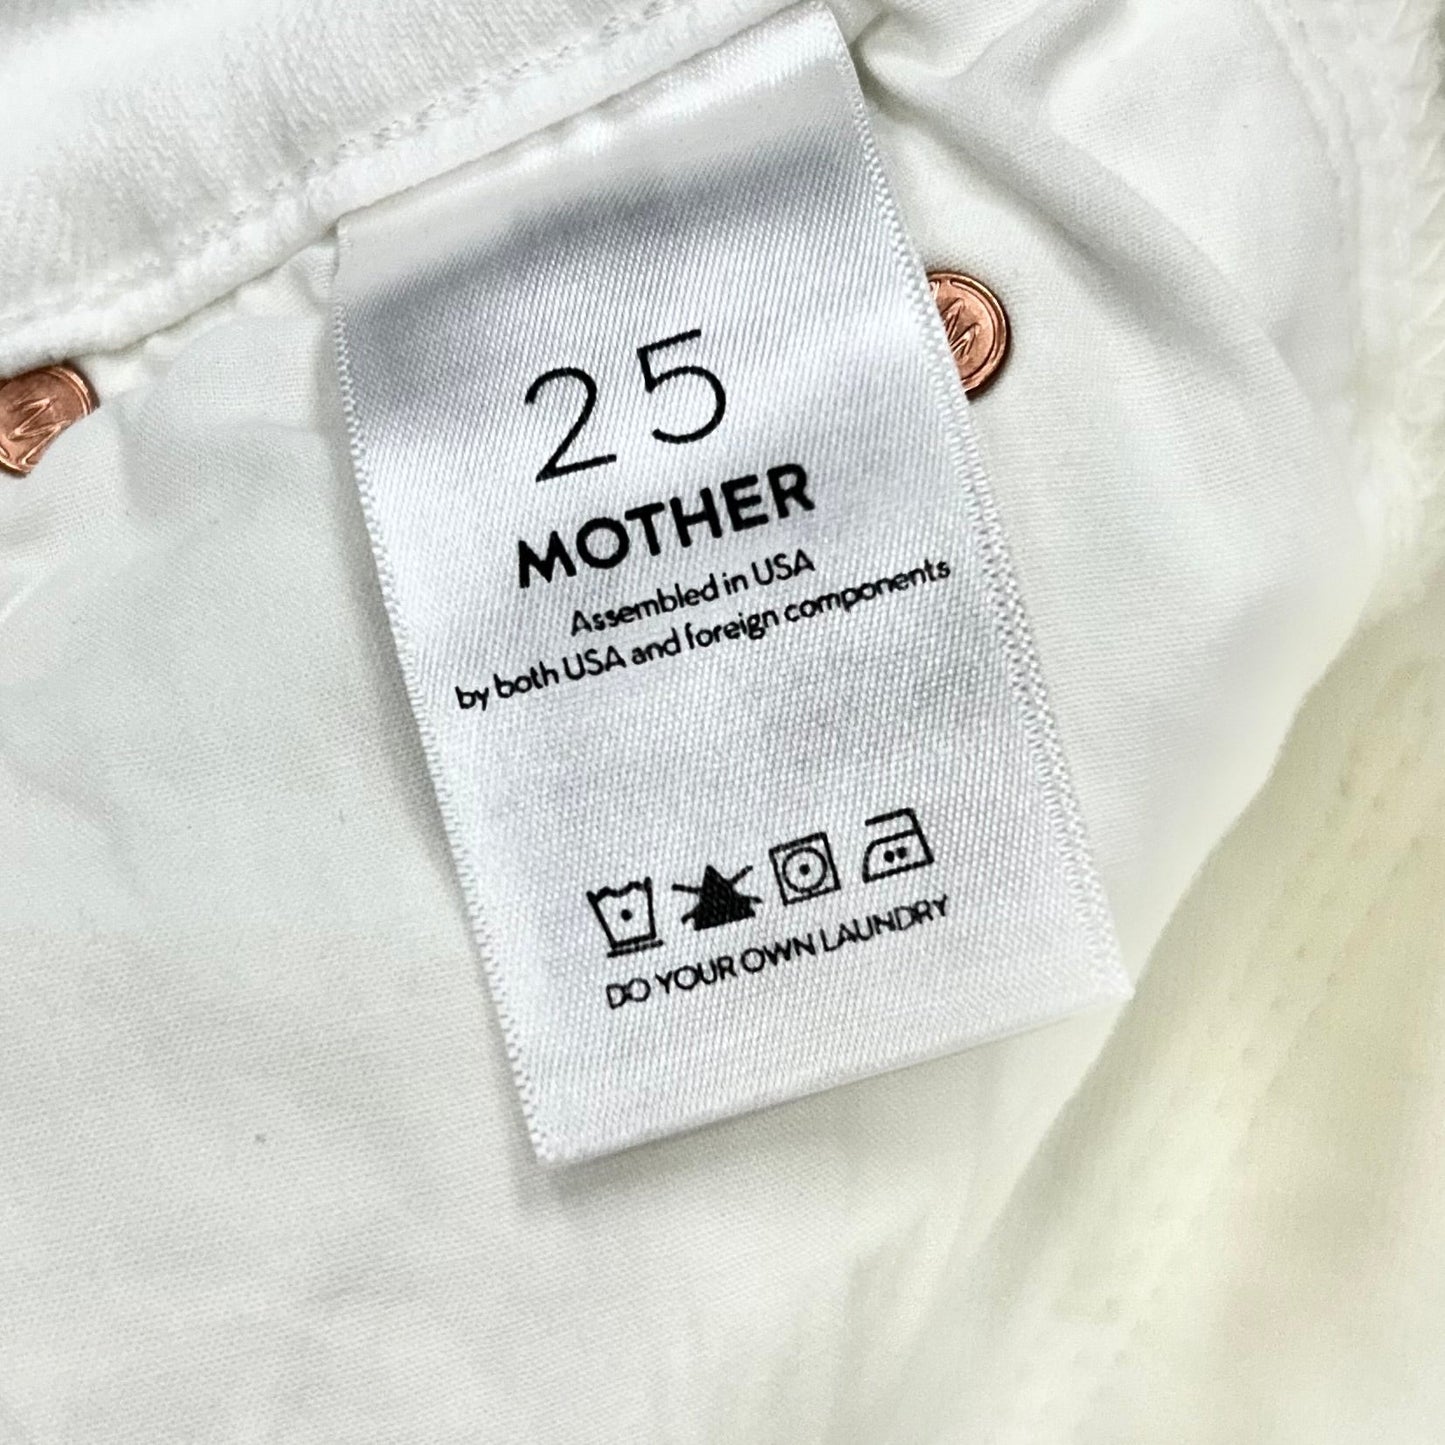 White Jeans Designer By Mother, Size: 0